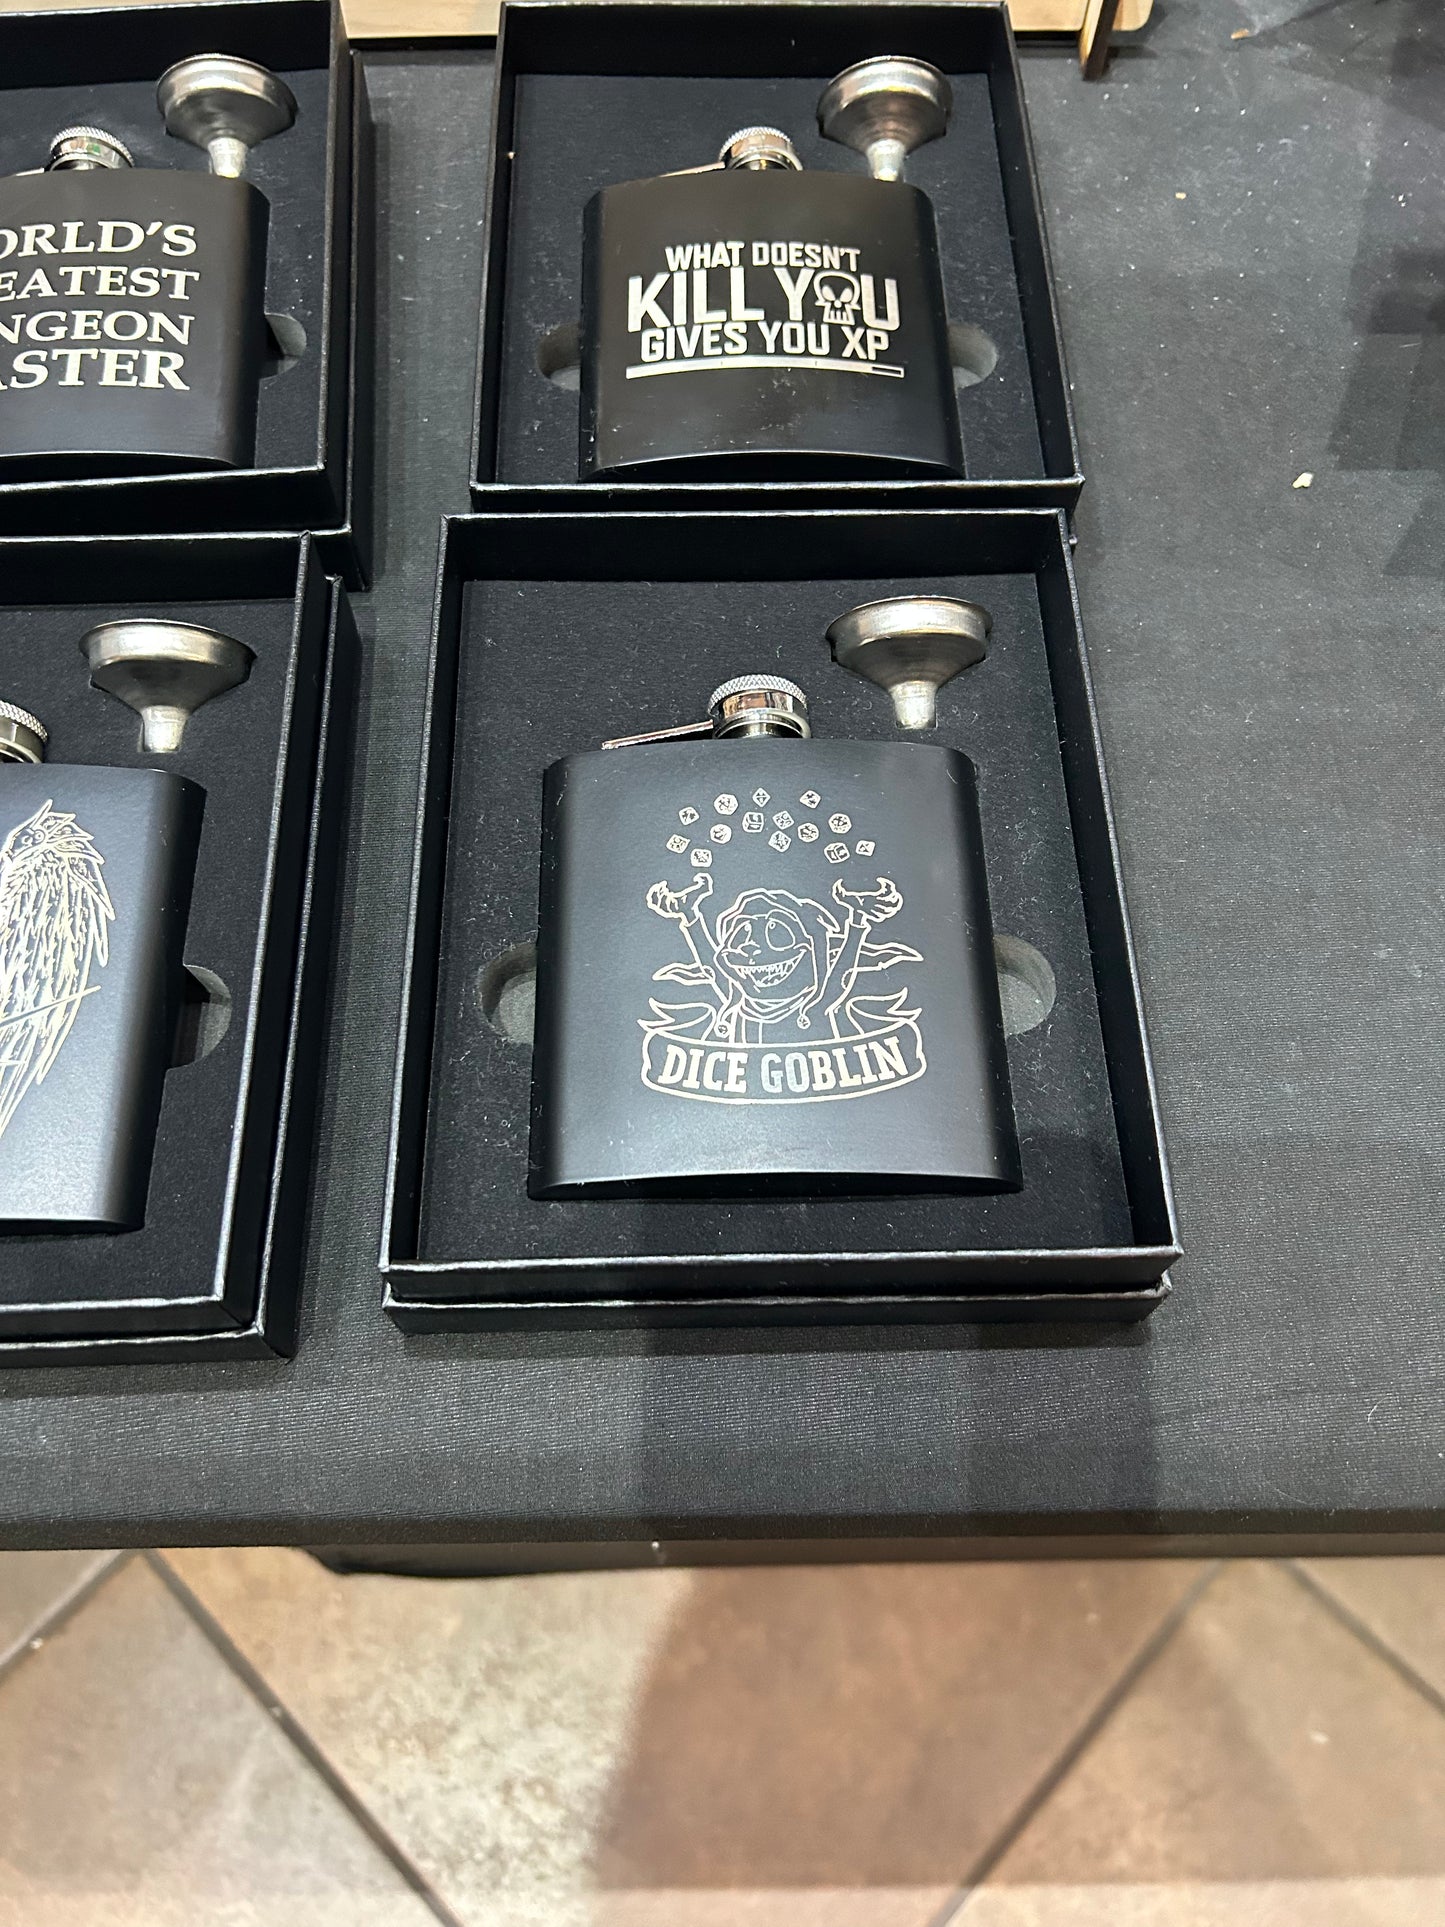 Dice Goblin Stainless Steel Flask Flasks Level 1 Gamers   